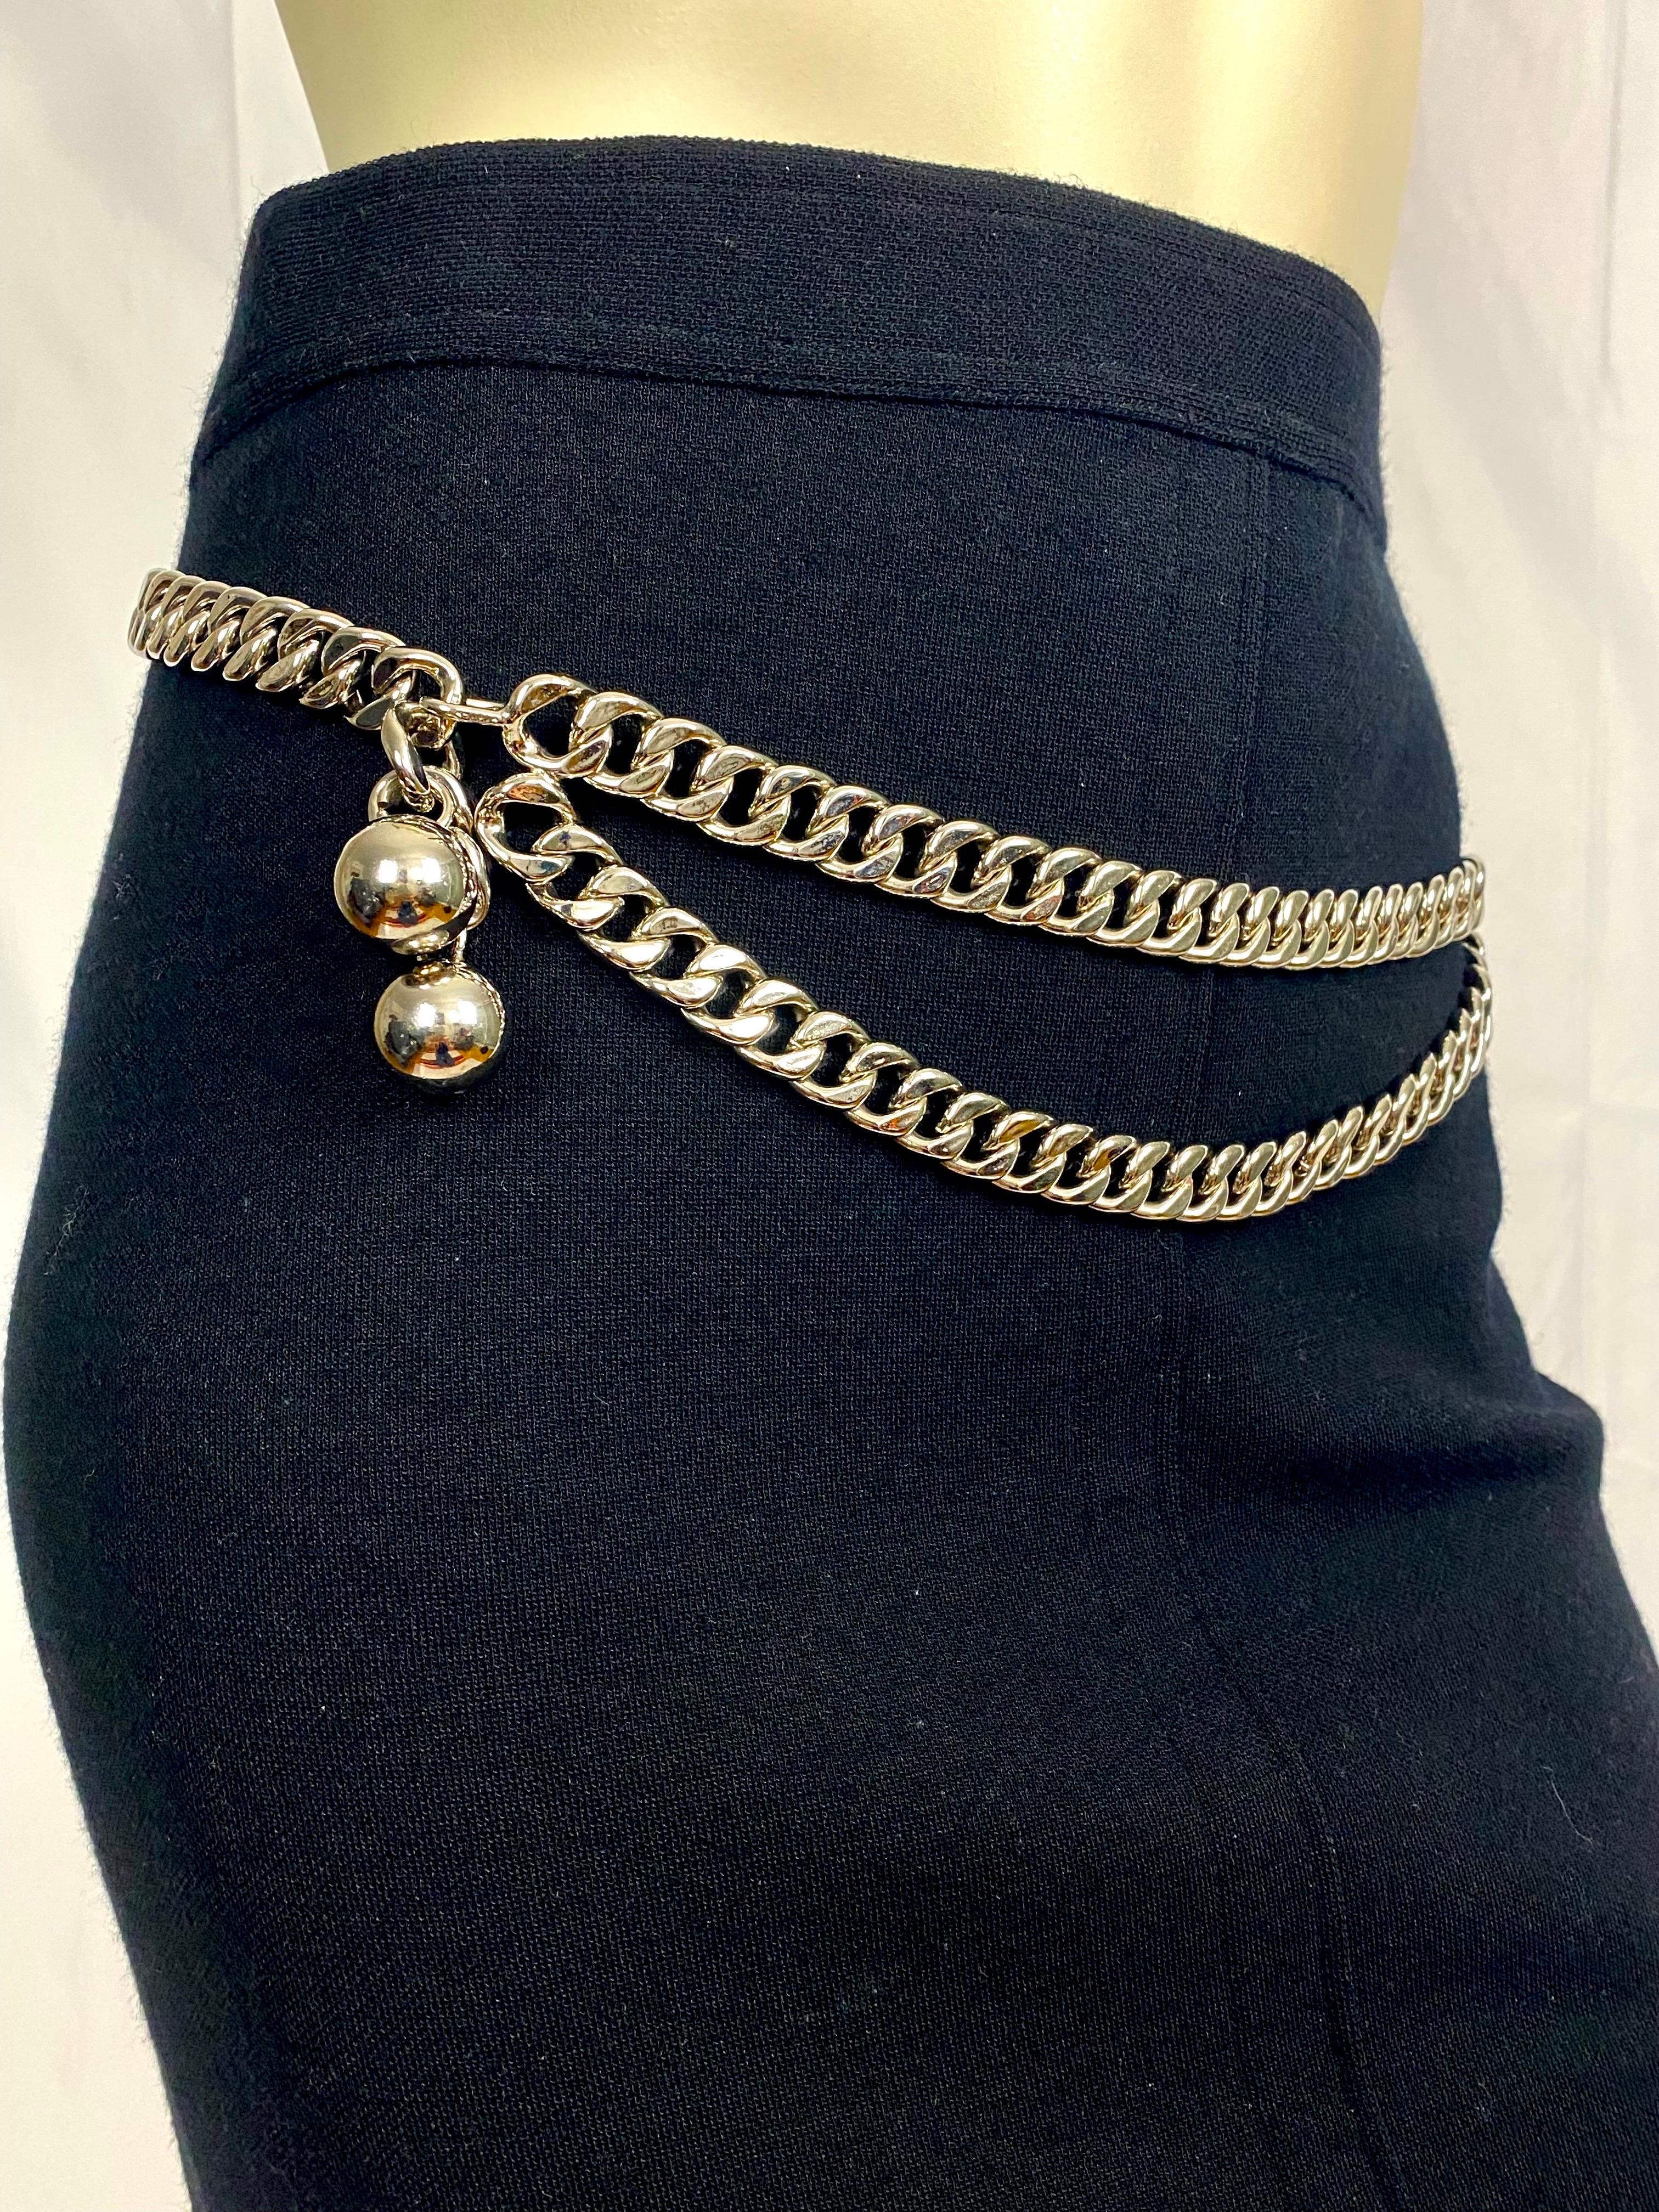 Vintage Chanel heavy silver chain link belt For Sale 4